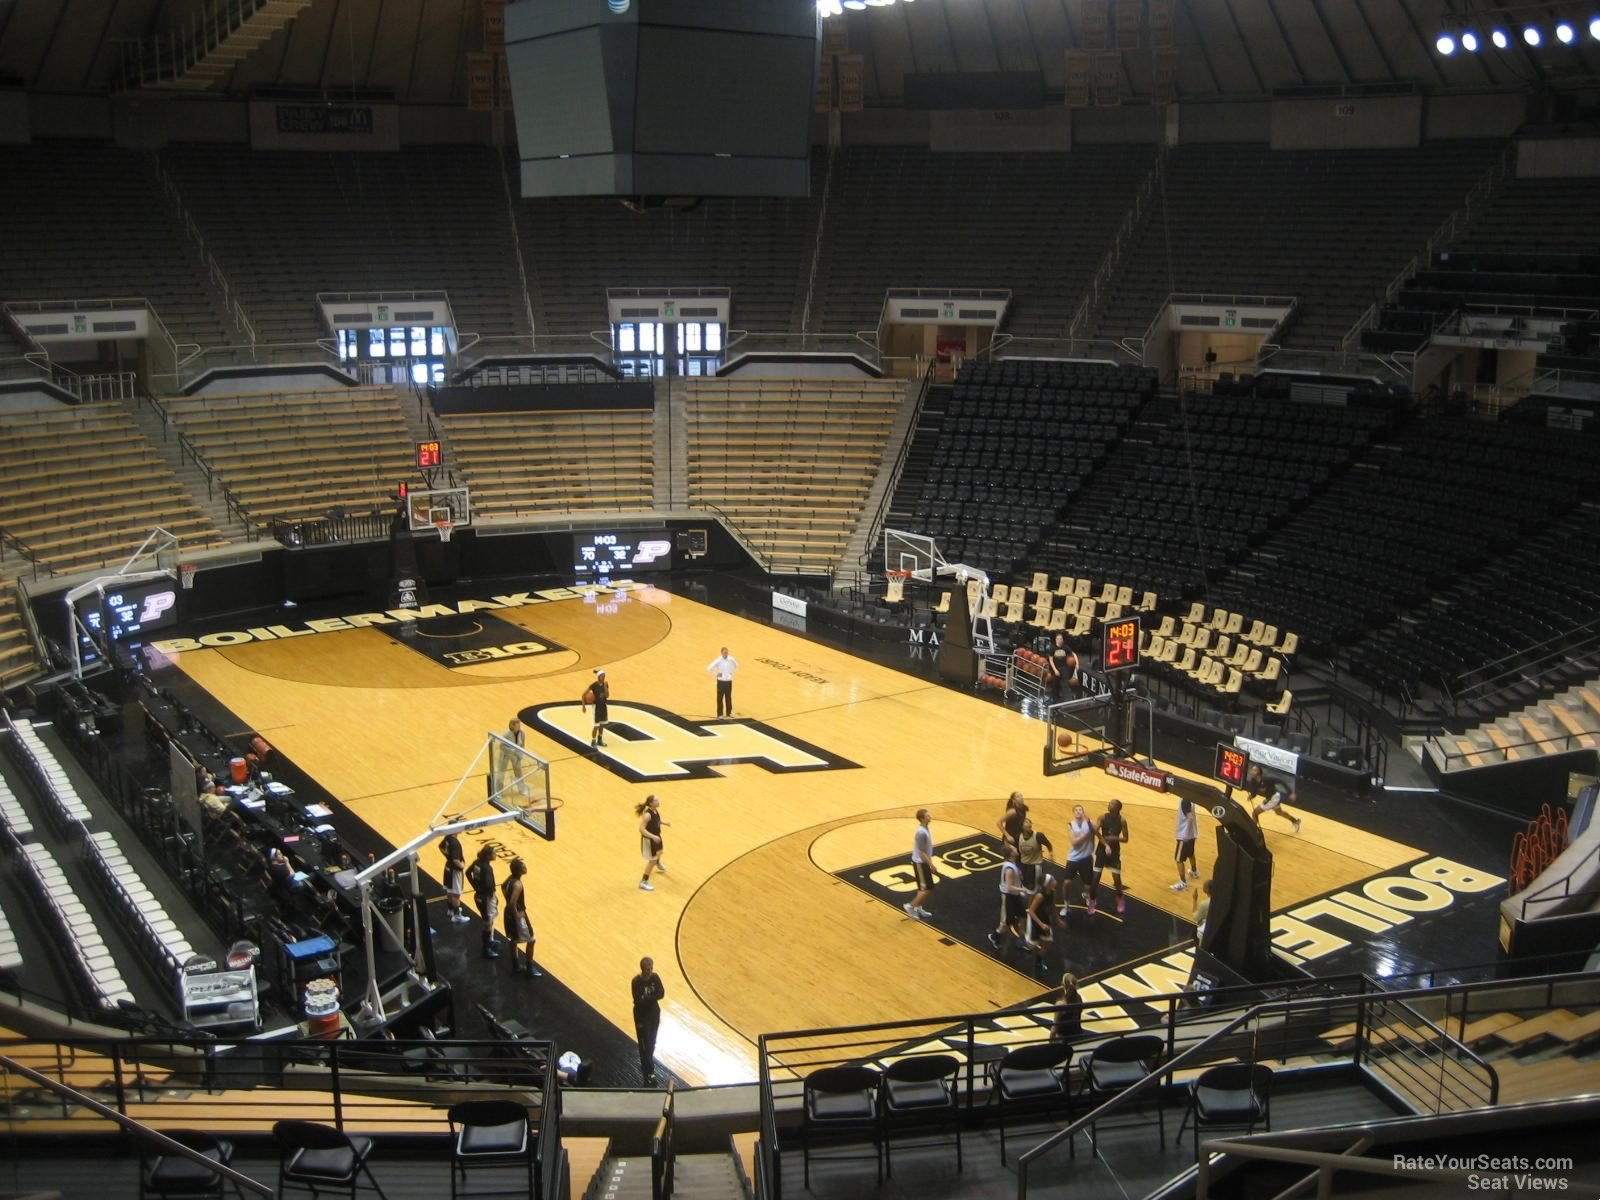 section 117, row 10 seat view  - mackey arena